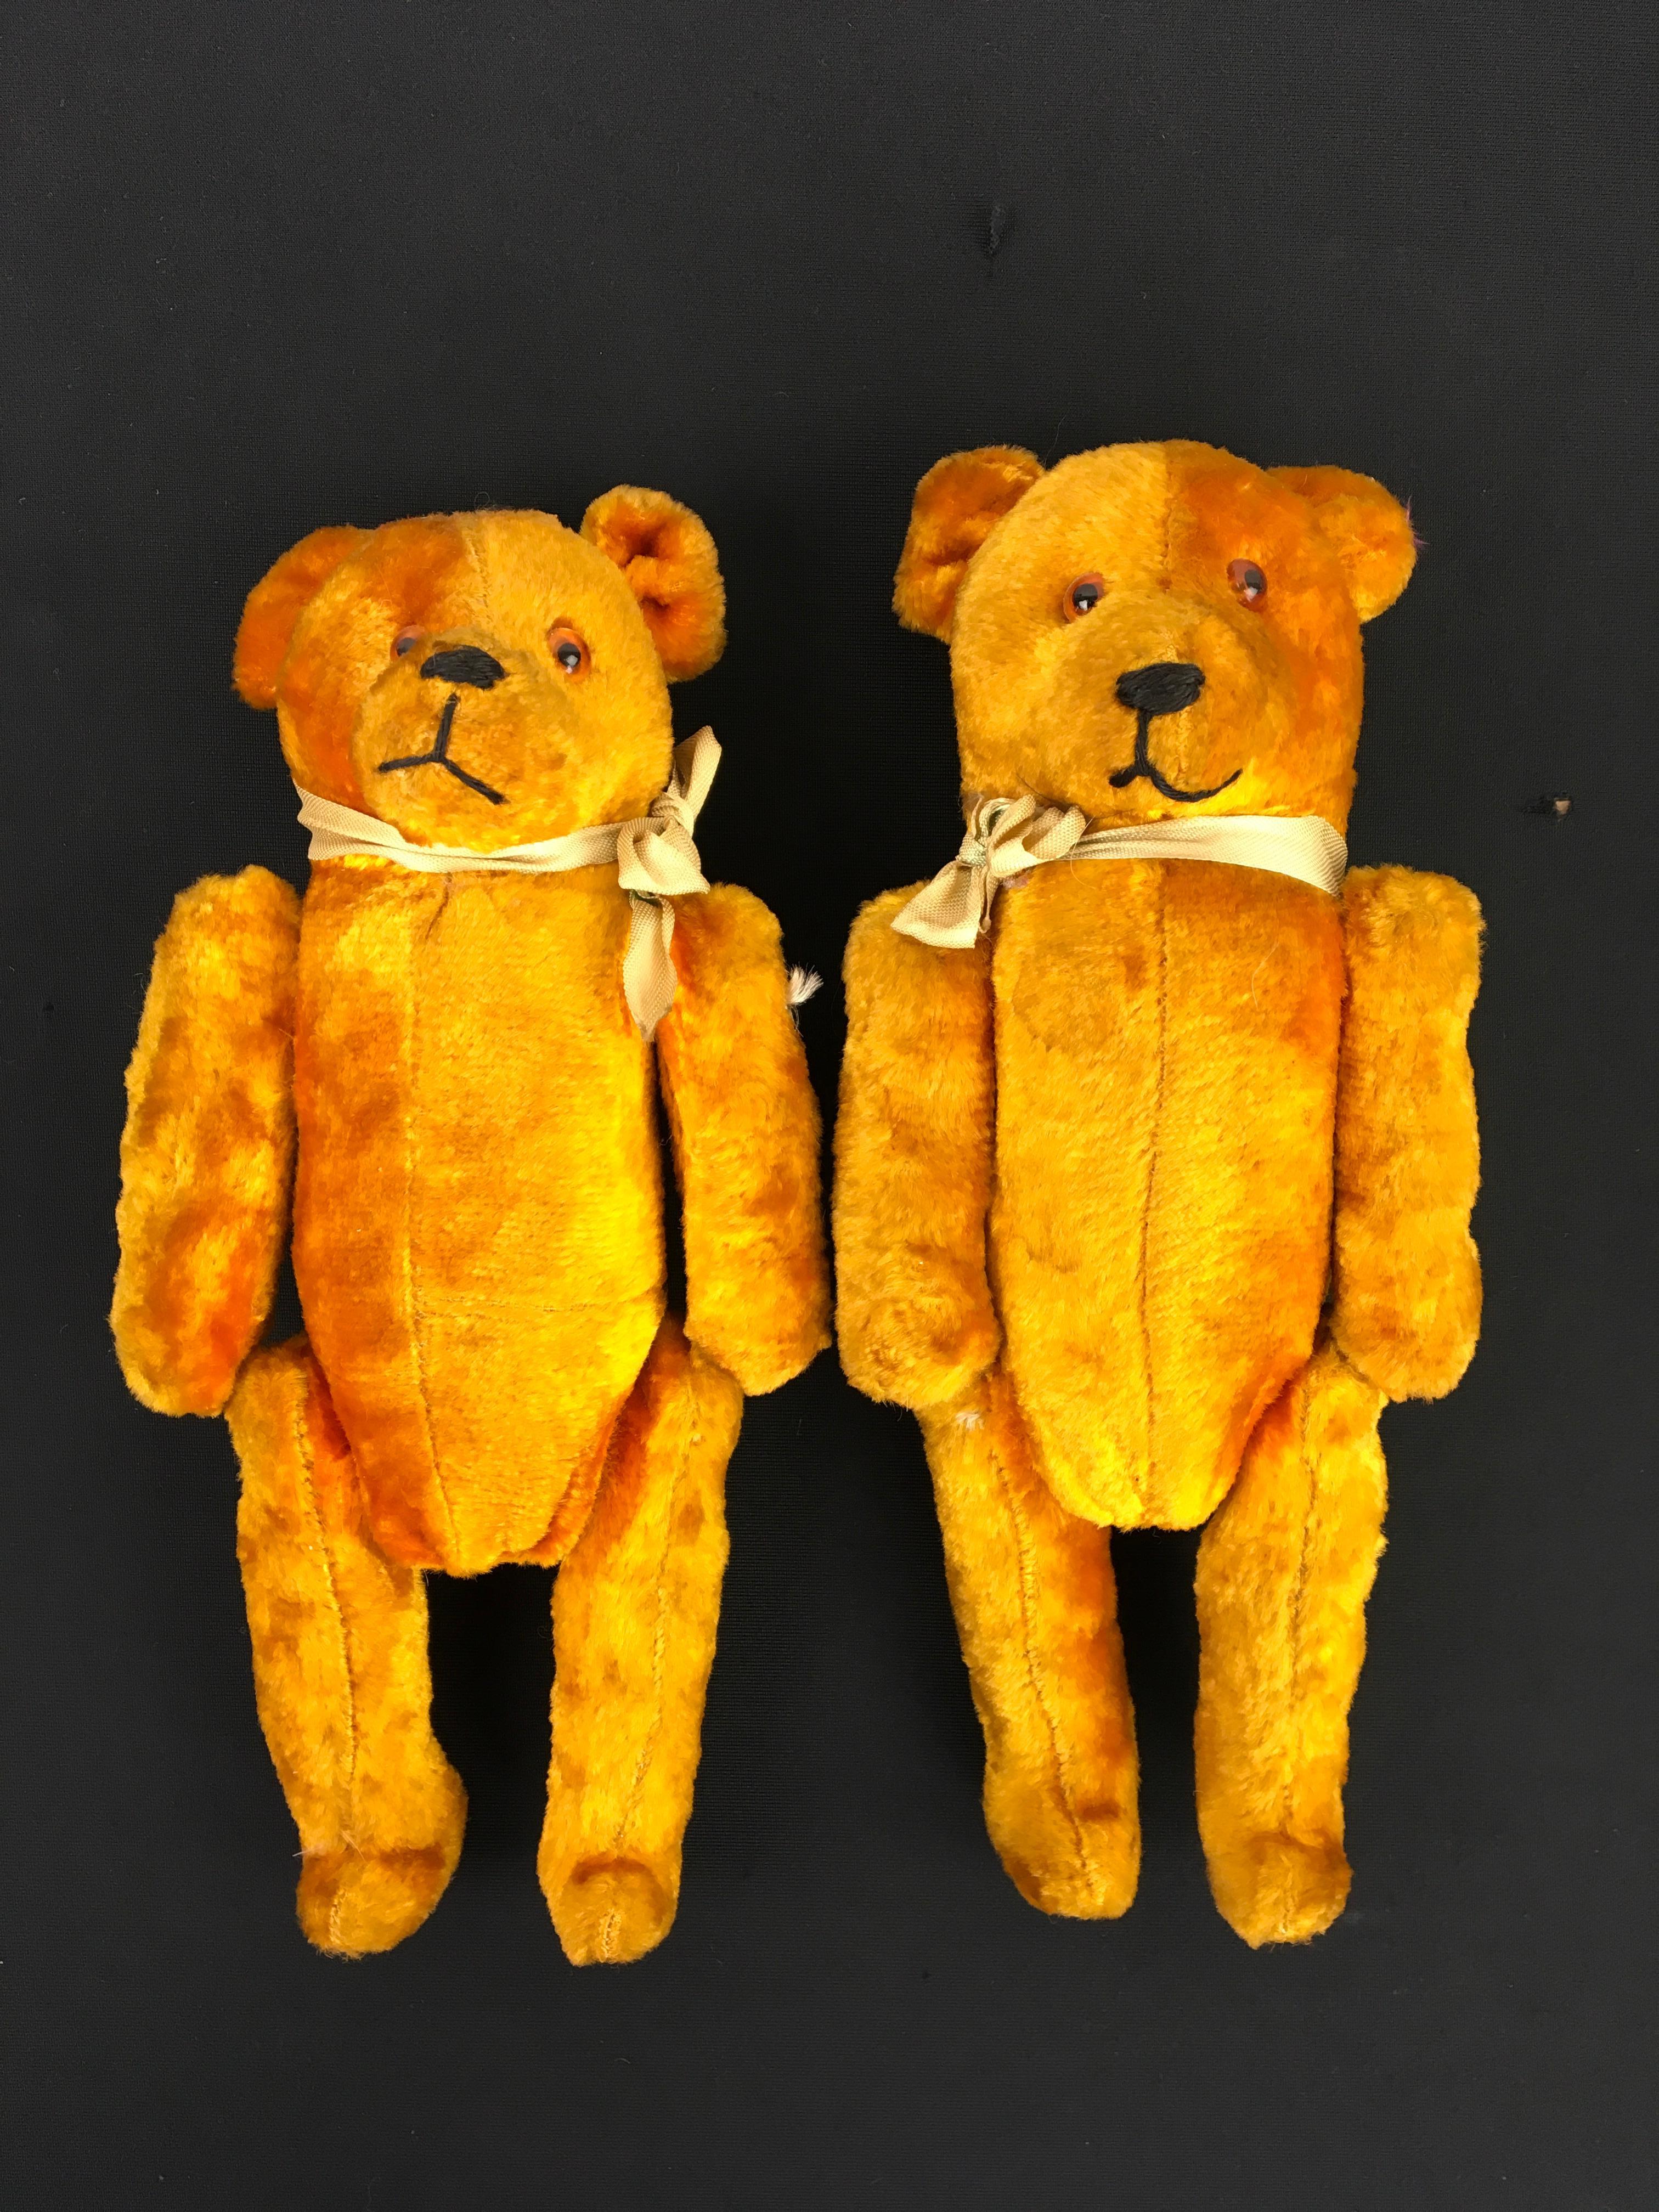 Pair of antique velvet toy bears. 
Gold - brown - yellow velvet bears with glass eyes and straw stuffed. 
With sewn mouth and nose and movable arms and legs. 
Looks like a couple ( male and female ) as there heads are different in size. 

Beautiful